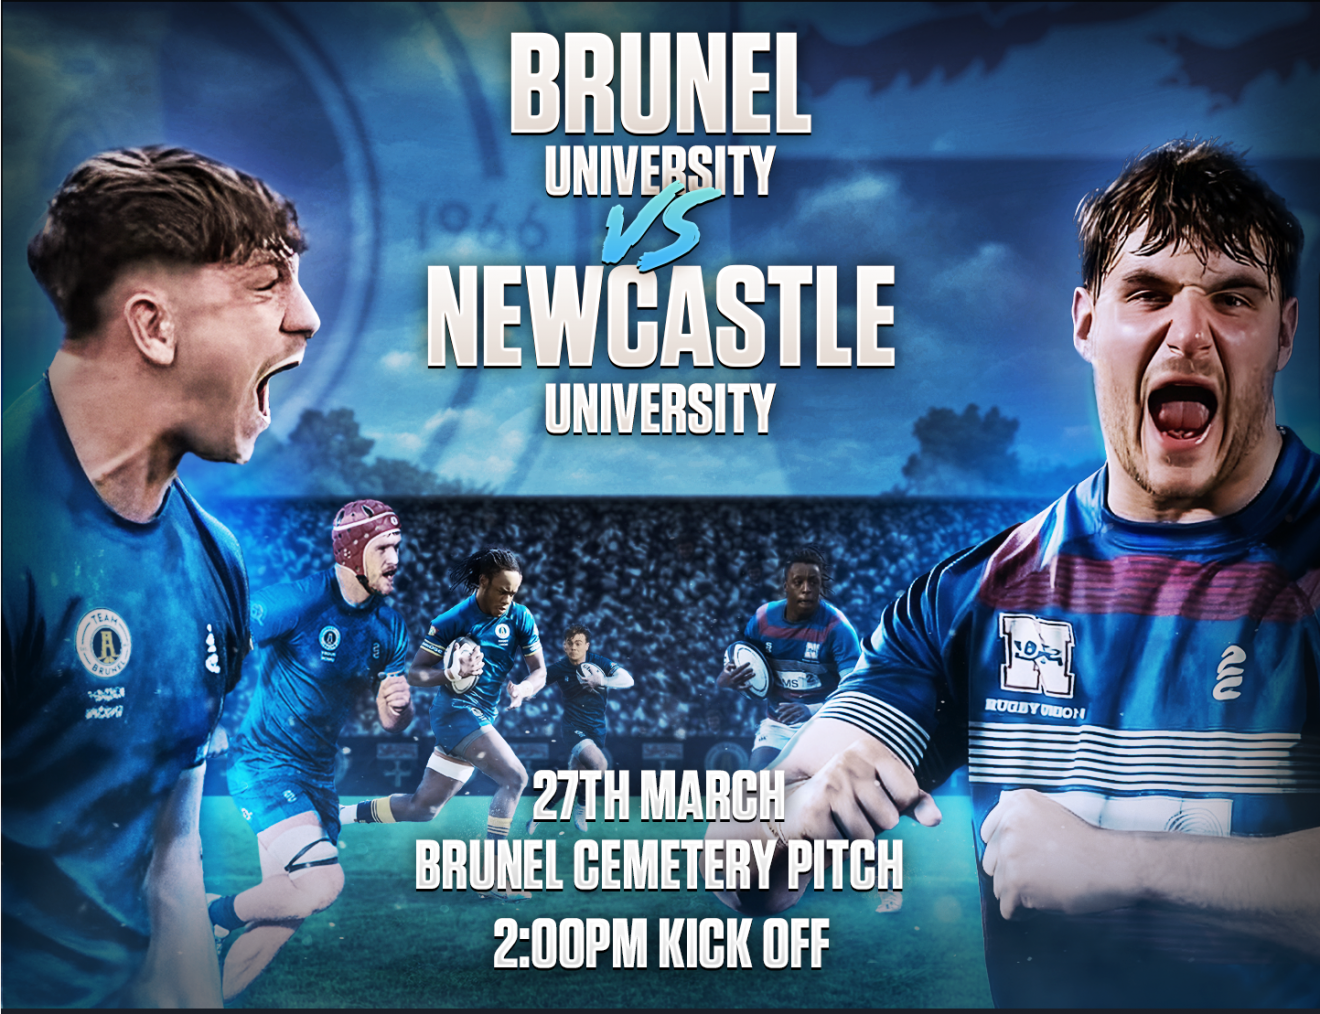 Come and Support Us for the Big Game at Brunel!